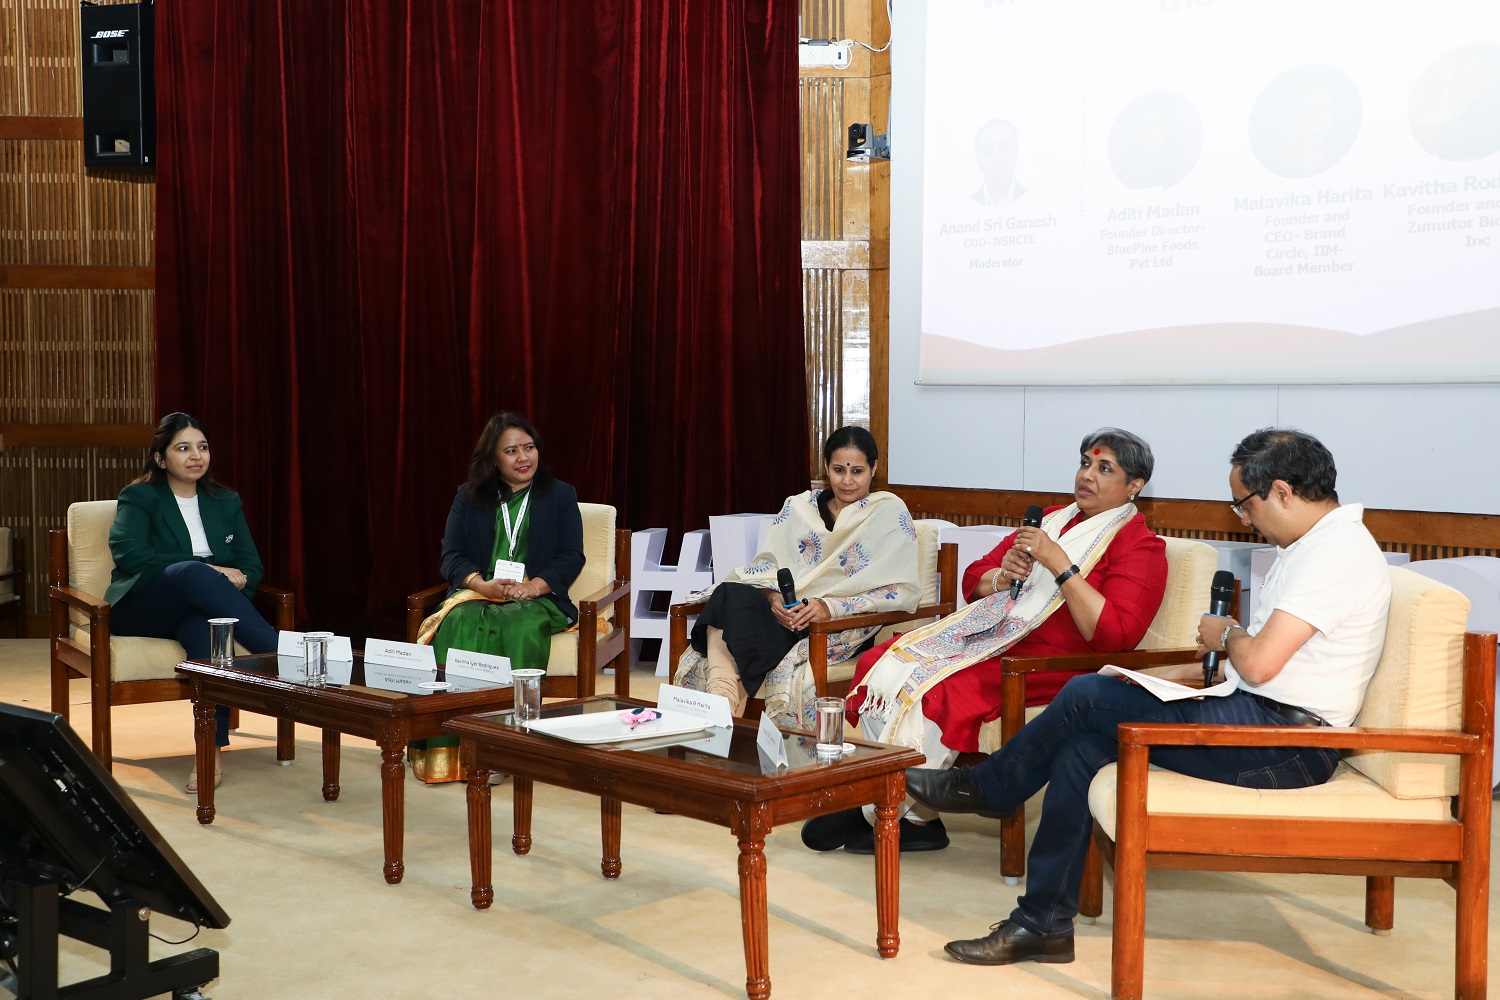 (L-R) Iram Maimuna, Founder of E waste Social Pvt Ltd, Aditi Madan, Founder Director, BluePine Foods Pvt Ltd, Kavitha Iyer Rodrigues, Founder and CEO Zumutor Biologics Inc, Malavika R Harita, Member of the Board of Governor at IIMB, Anand Sri Ganesh, COO, NSRCEL, at the panel discussion on “What do women entrepreneurs bring to the table today?”